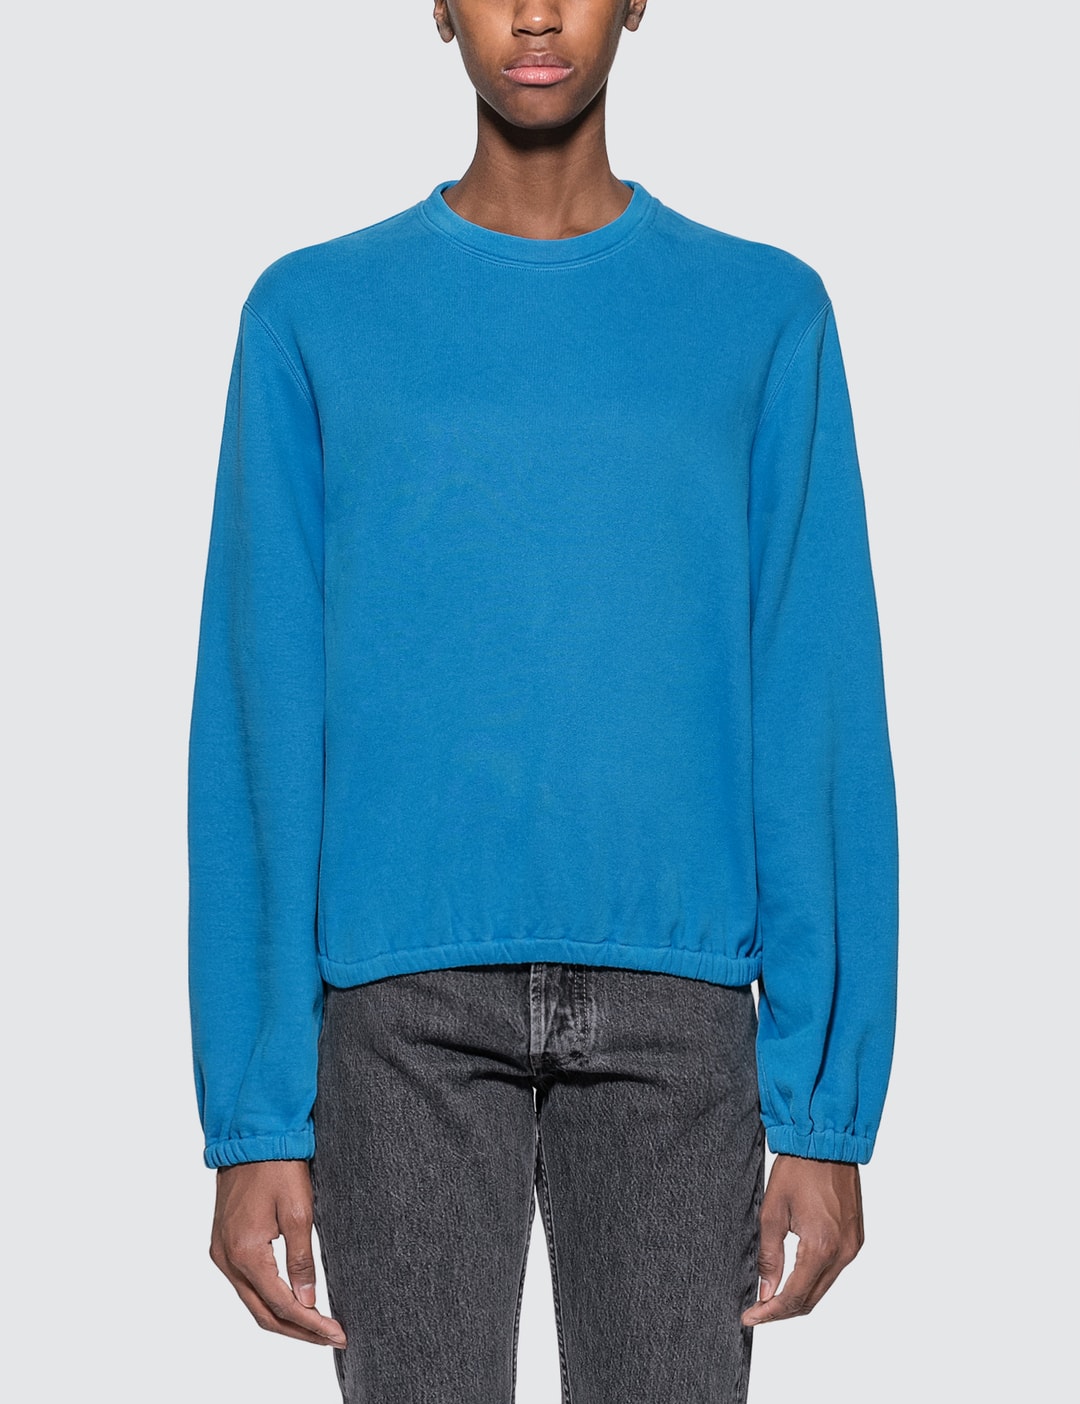 Helmut Lang - Vintage Terry Sweatshirt | HBX - Globally Curated Fashion ...